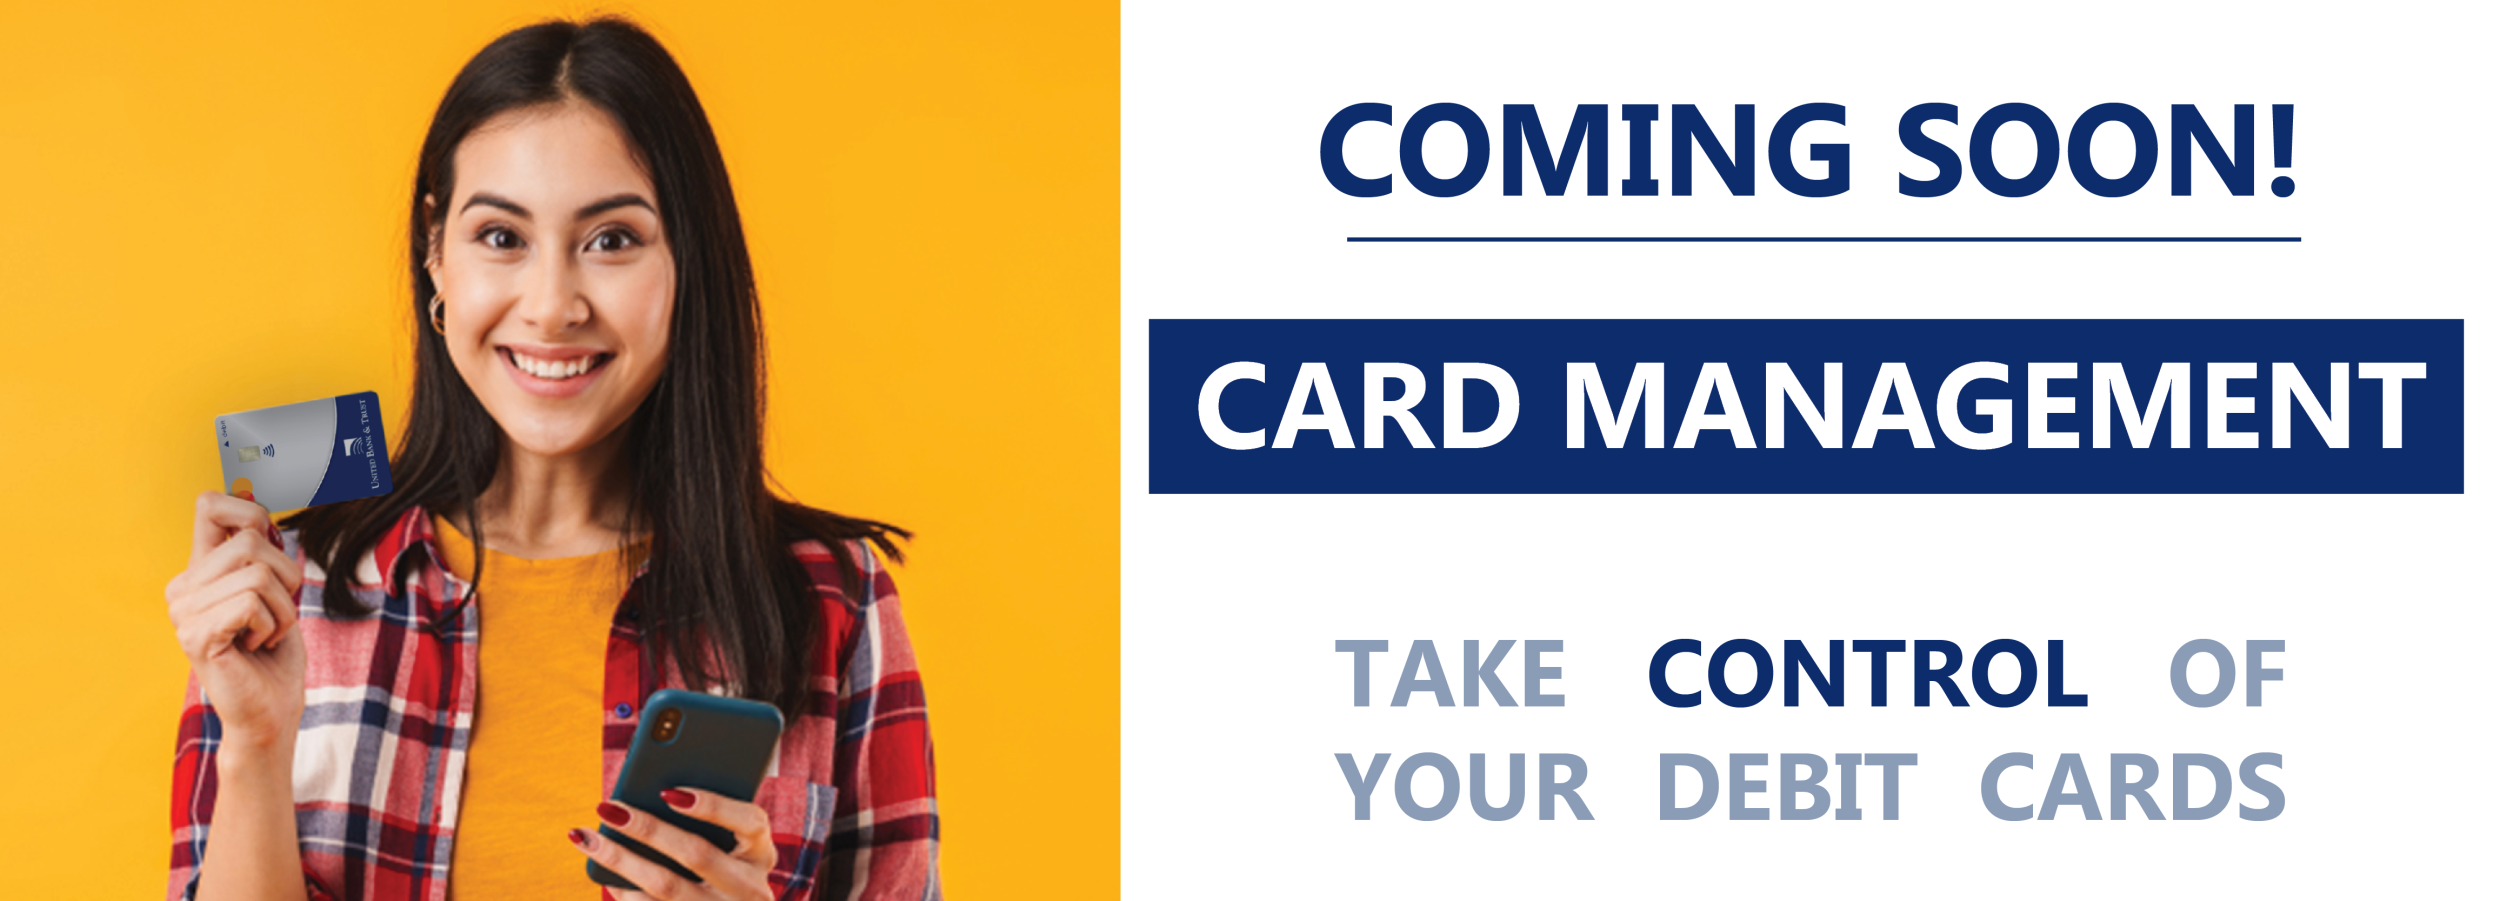 Card Management - Coming Soon